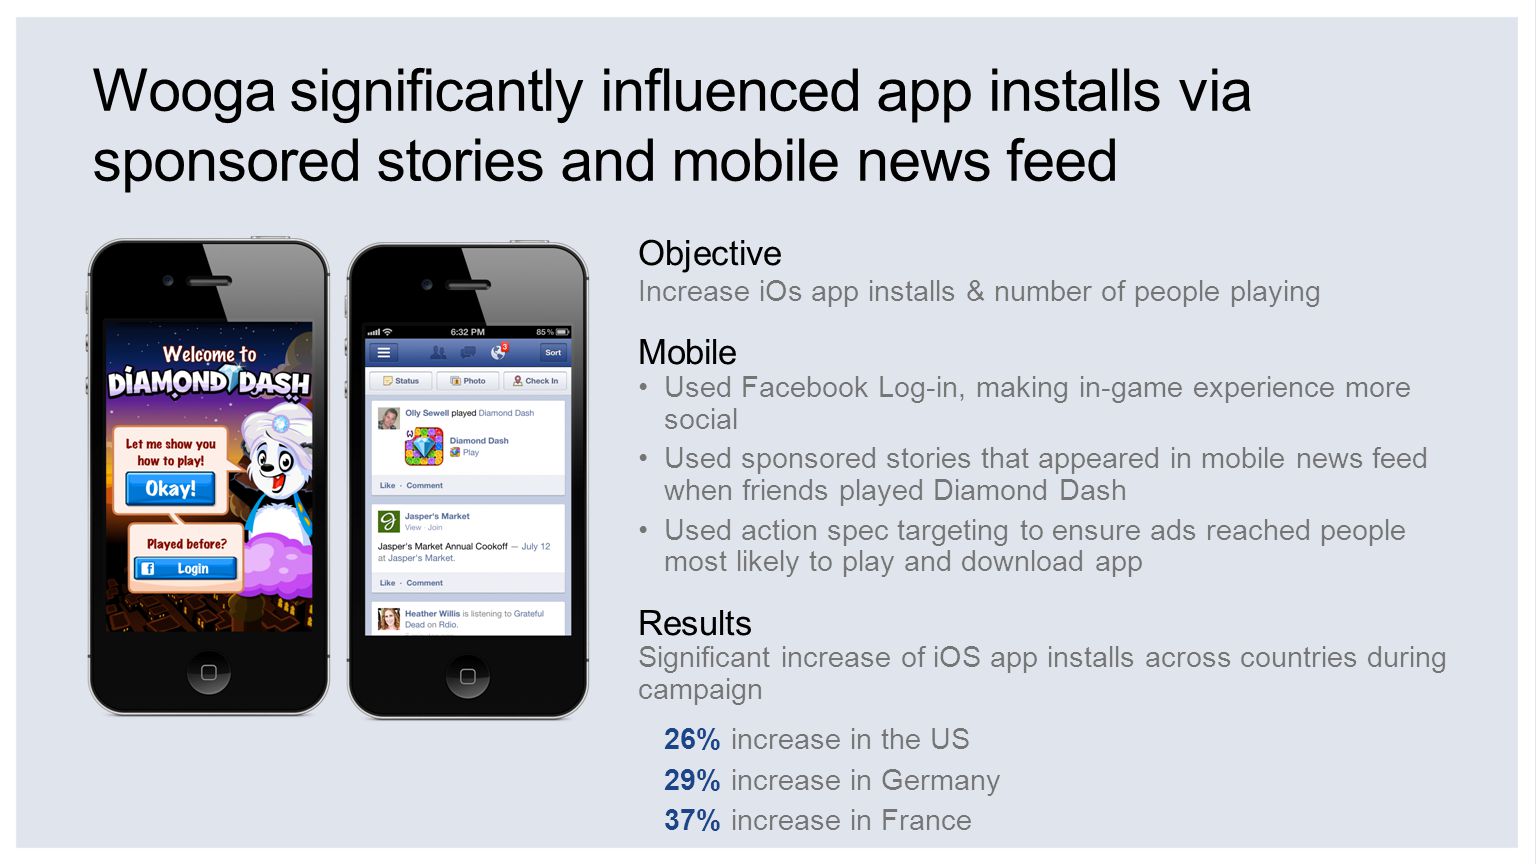 Wooga significantly influenced app installs via sponsored stories and mobile news feed Objective Increase iOs app installs & number of people playing Mobile Used Facebook Log-in, making in-game experience more social Used sponsored stories that appeared in mobile news feed when friends played Diamond Dash Used action spec targeting to ensure ads reached people most likely to play and download app Results Significant increase of iOS app installs across countries during campaign 26% increase in the US 29% increase in Germany 37% increase in France